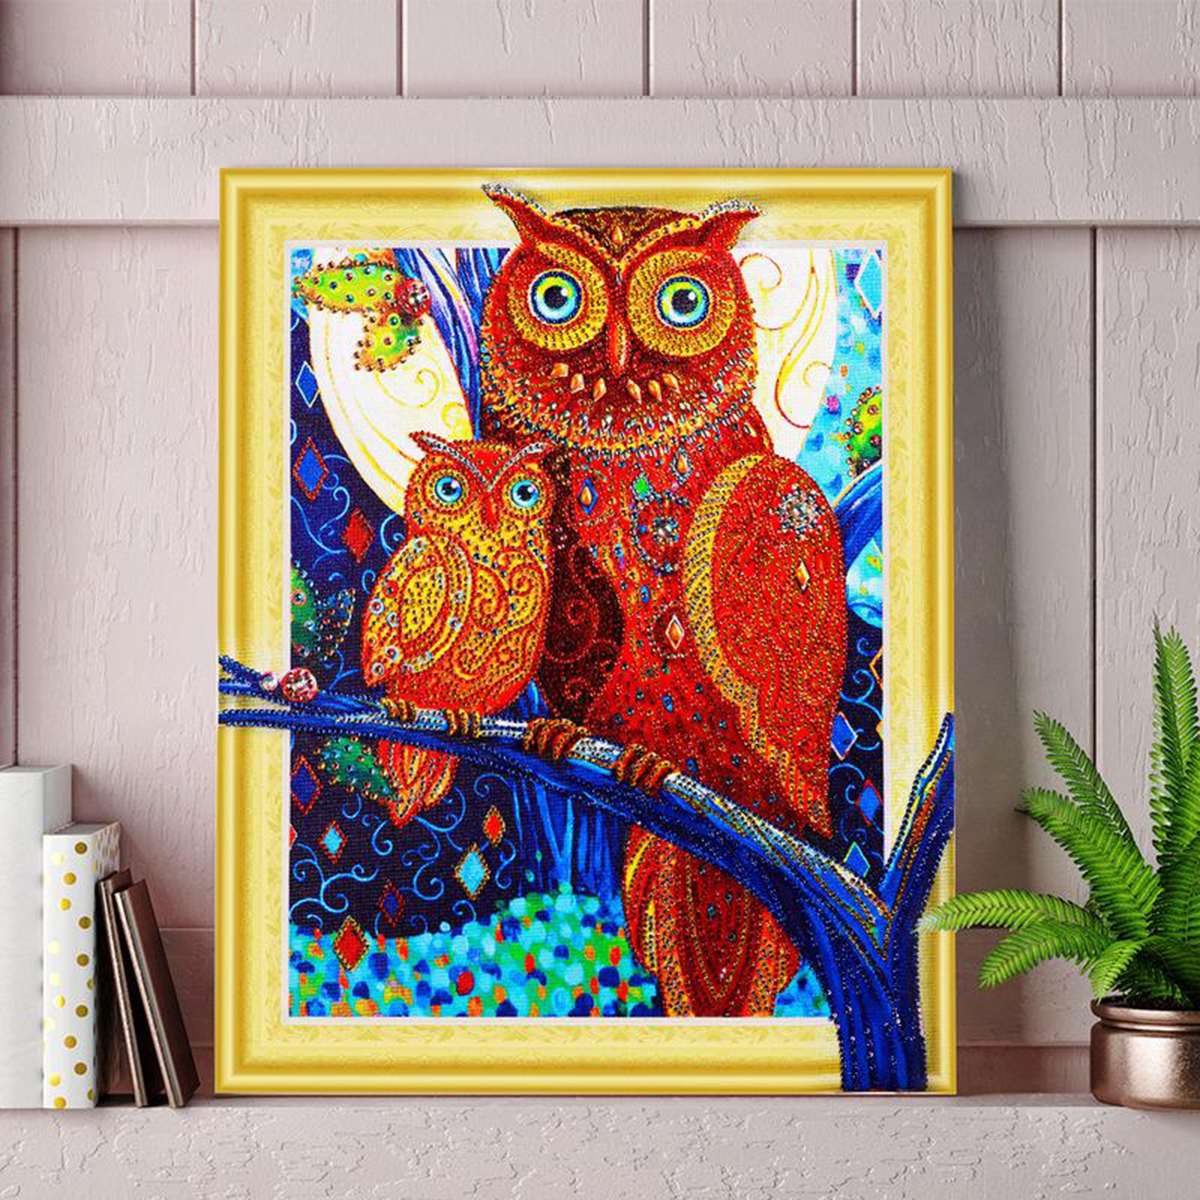 5D-Diamond-Painting-Horse-Owl-Lion-Embroidery-Cross-Stitch-Kit-Home-Office-Decorations-1692308-1